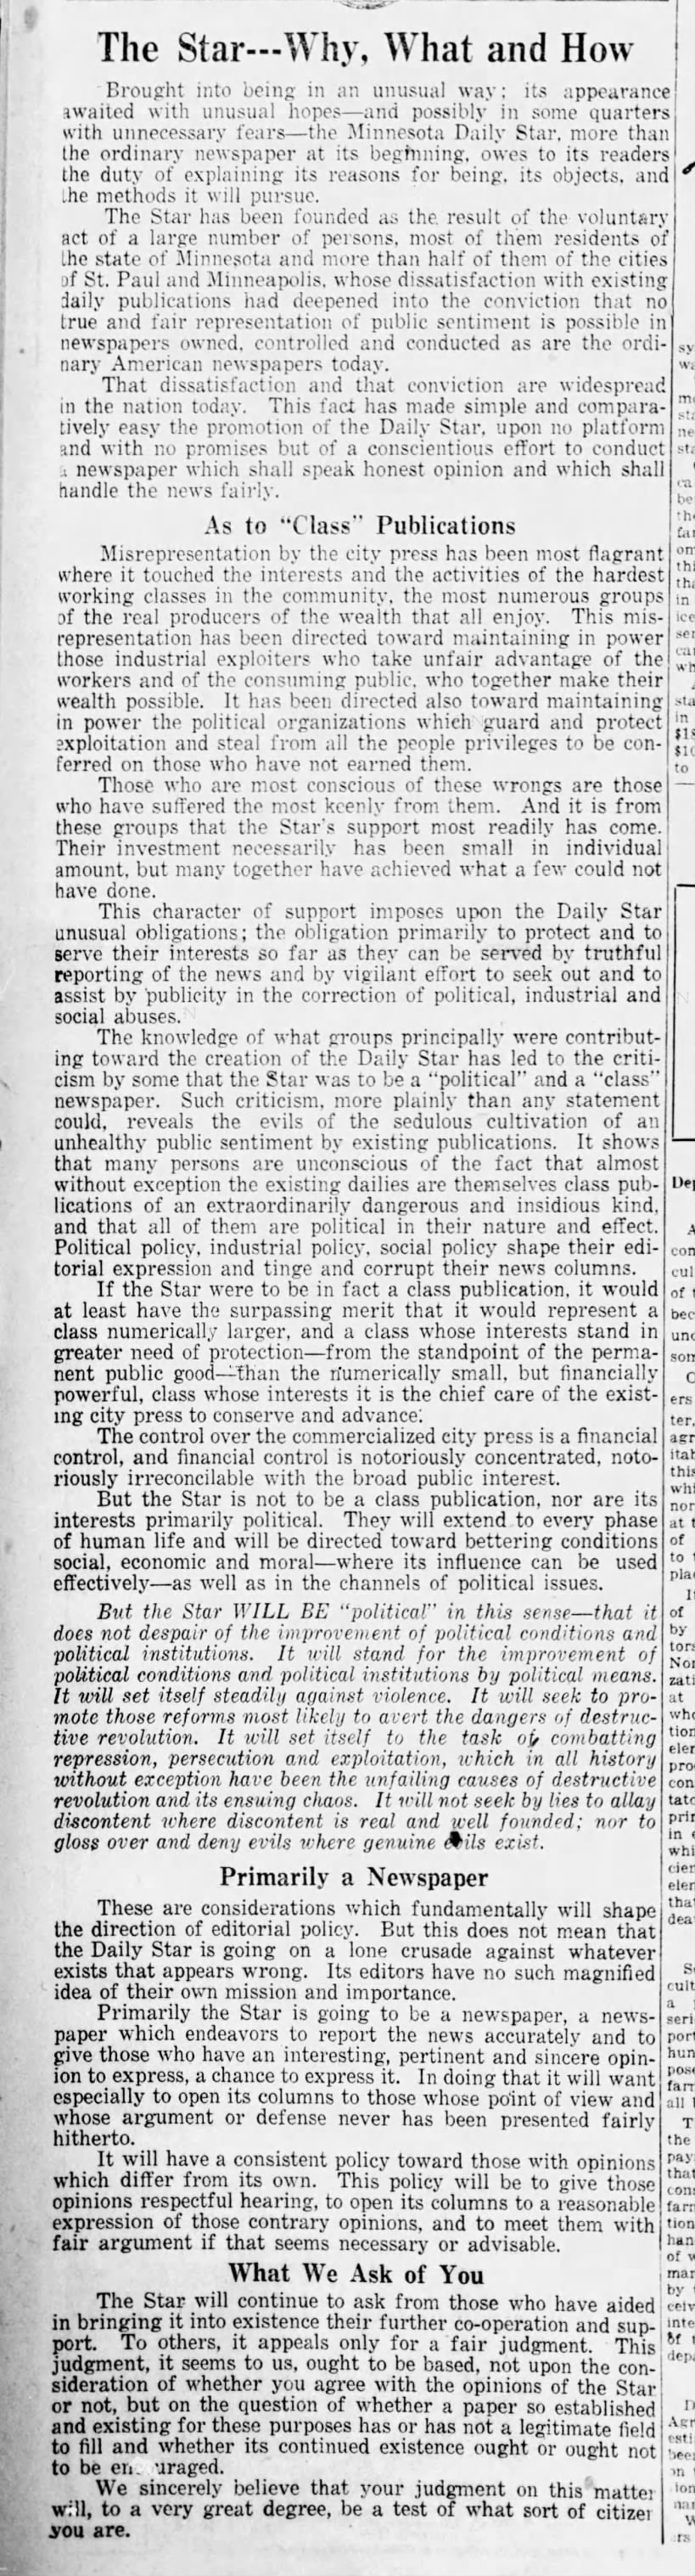 Introduction from the first issue of the Star